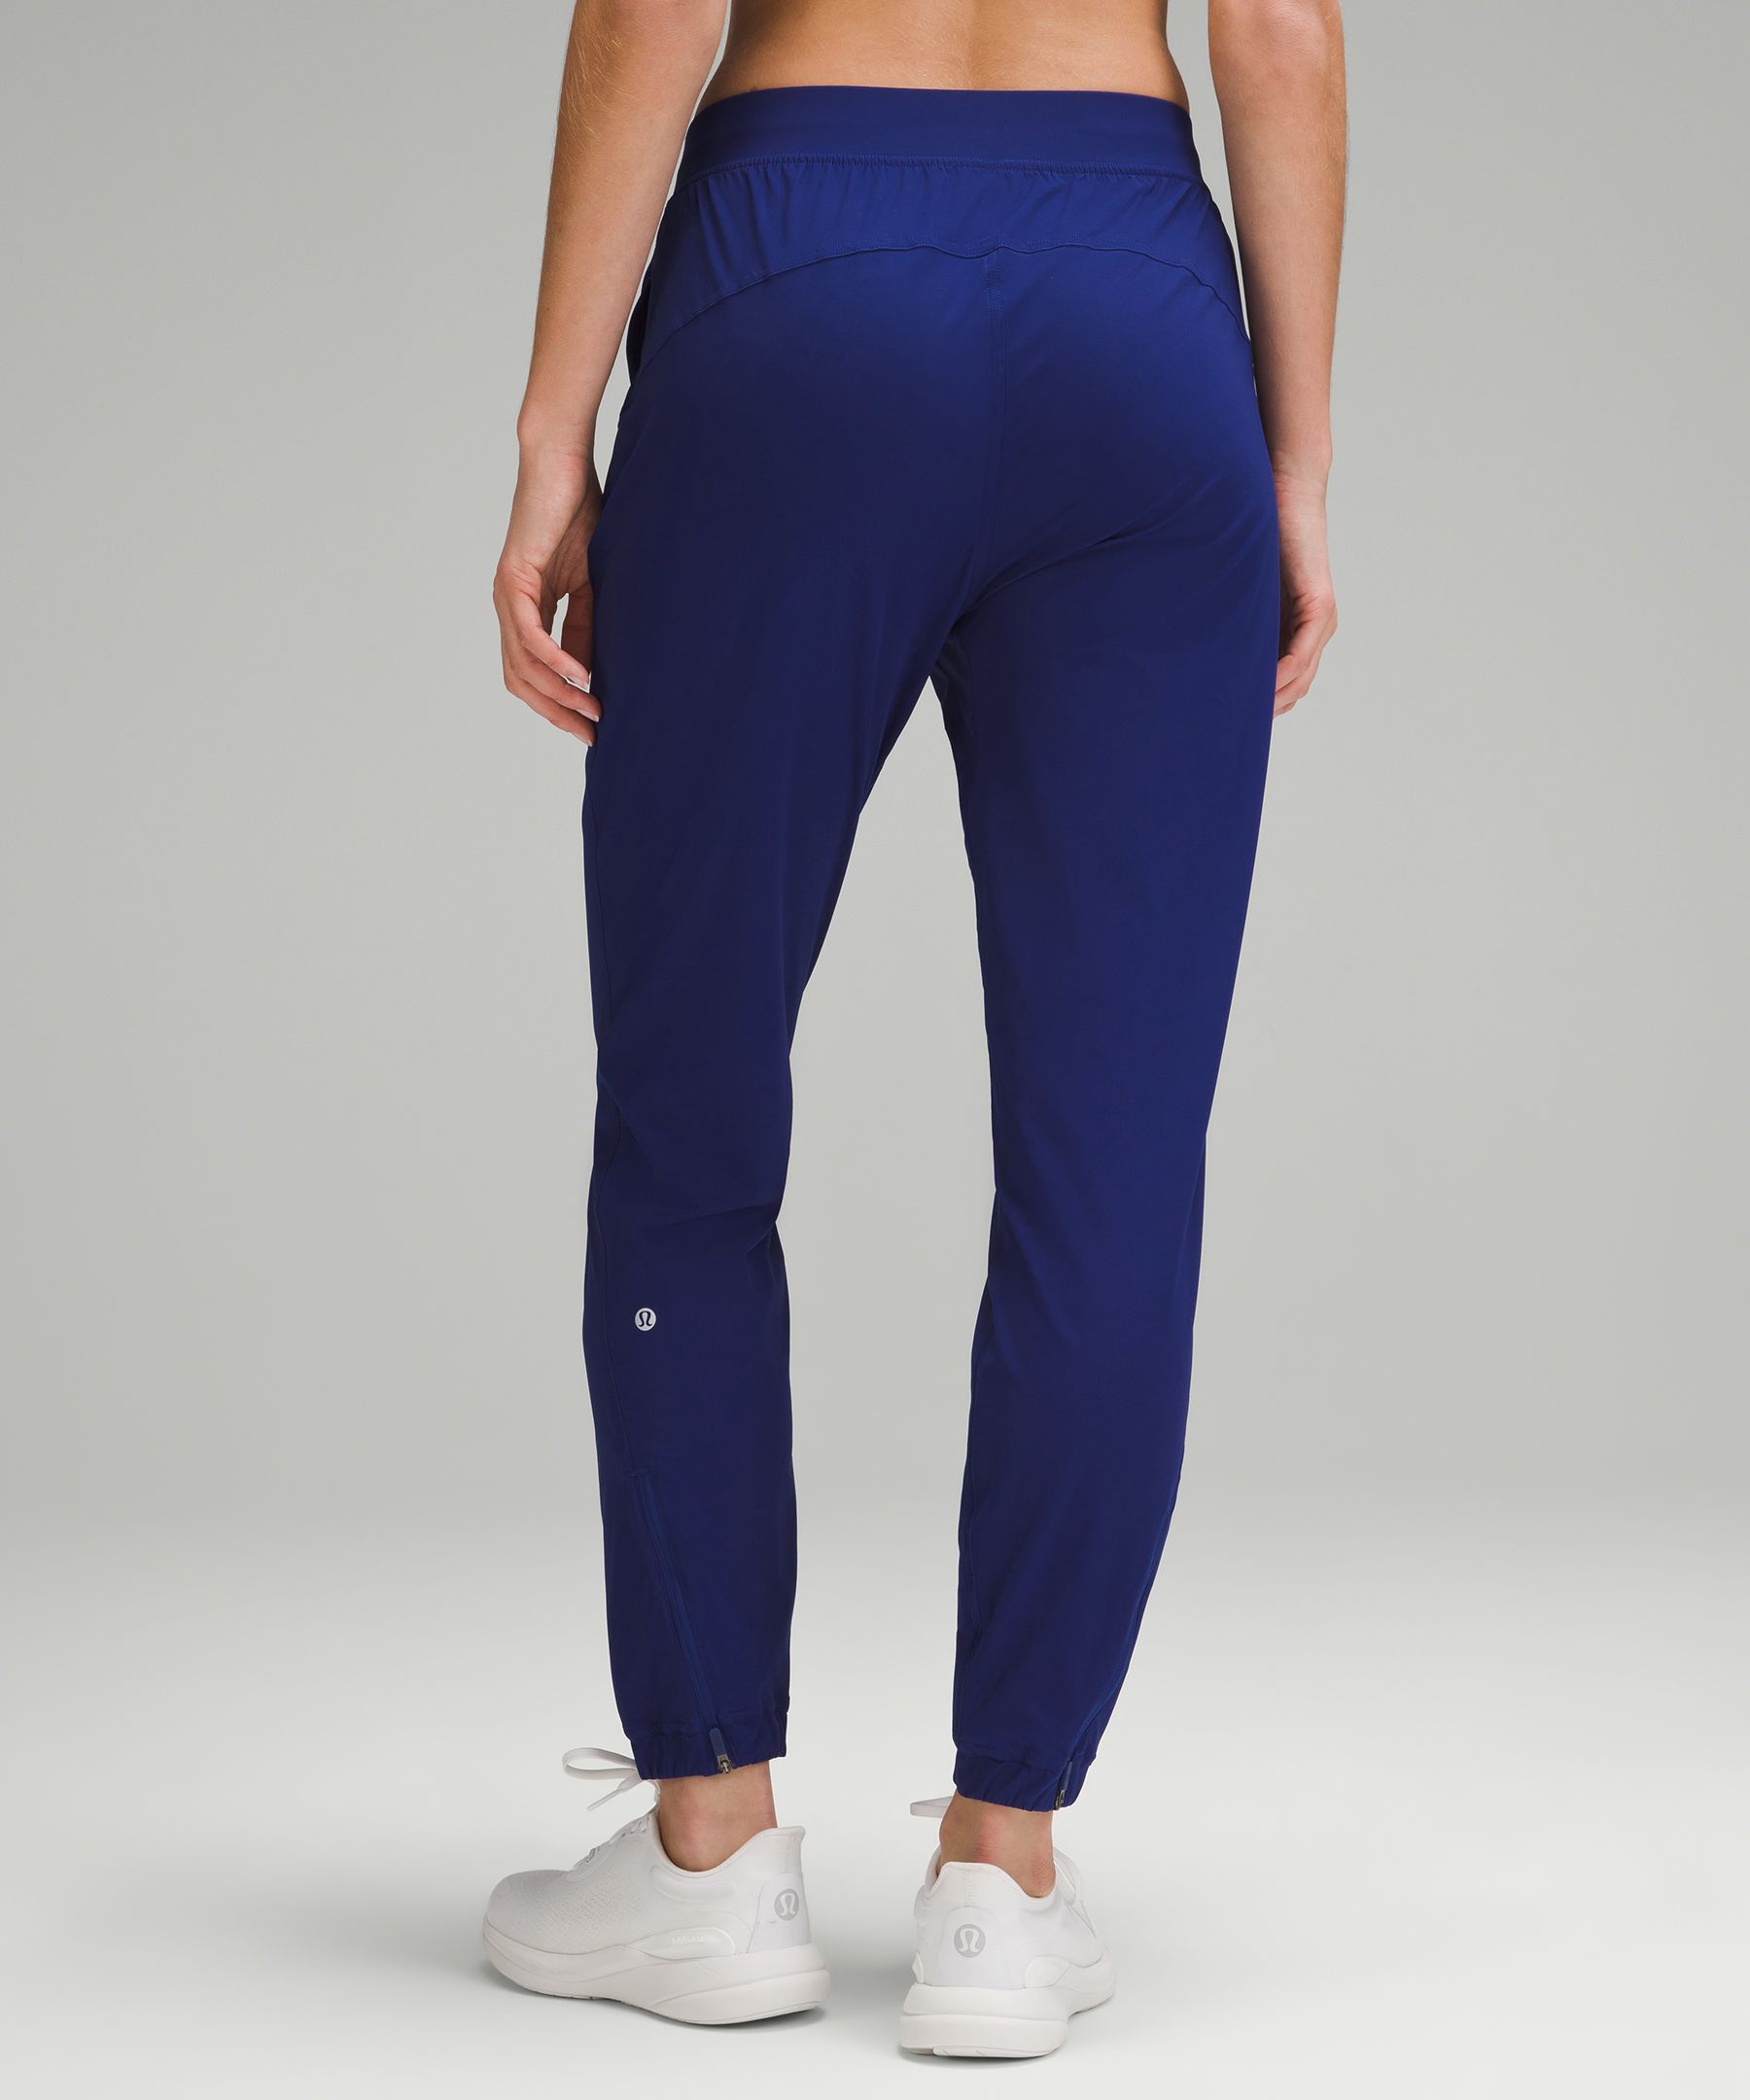 Adapted State Jogger (8), swiftly (8), ETS racerback crop (8). Honestly of  all the joggers I have I am so excited by these. I highly highly recommend  them. They are going to